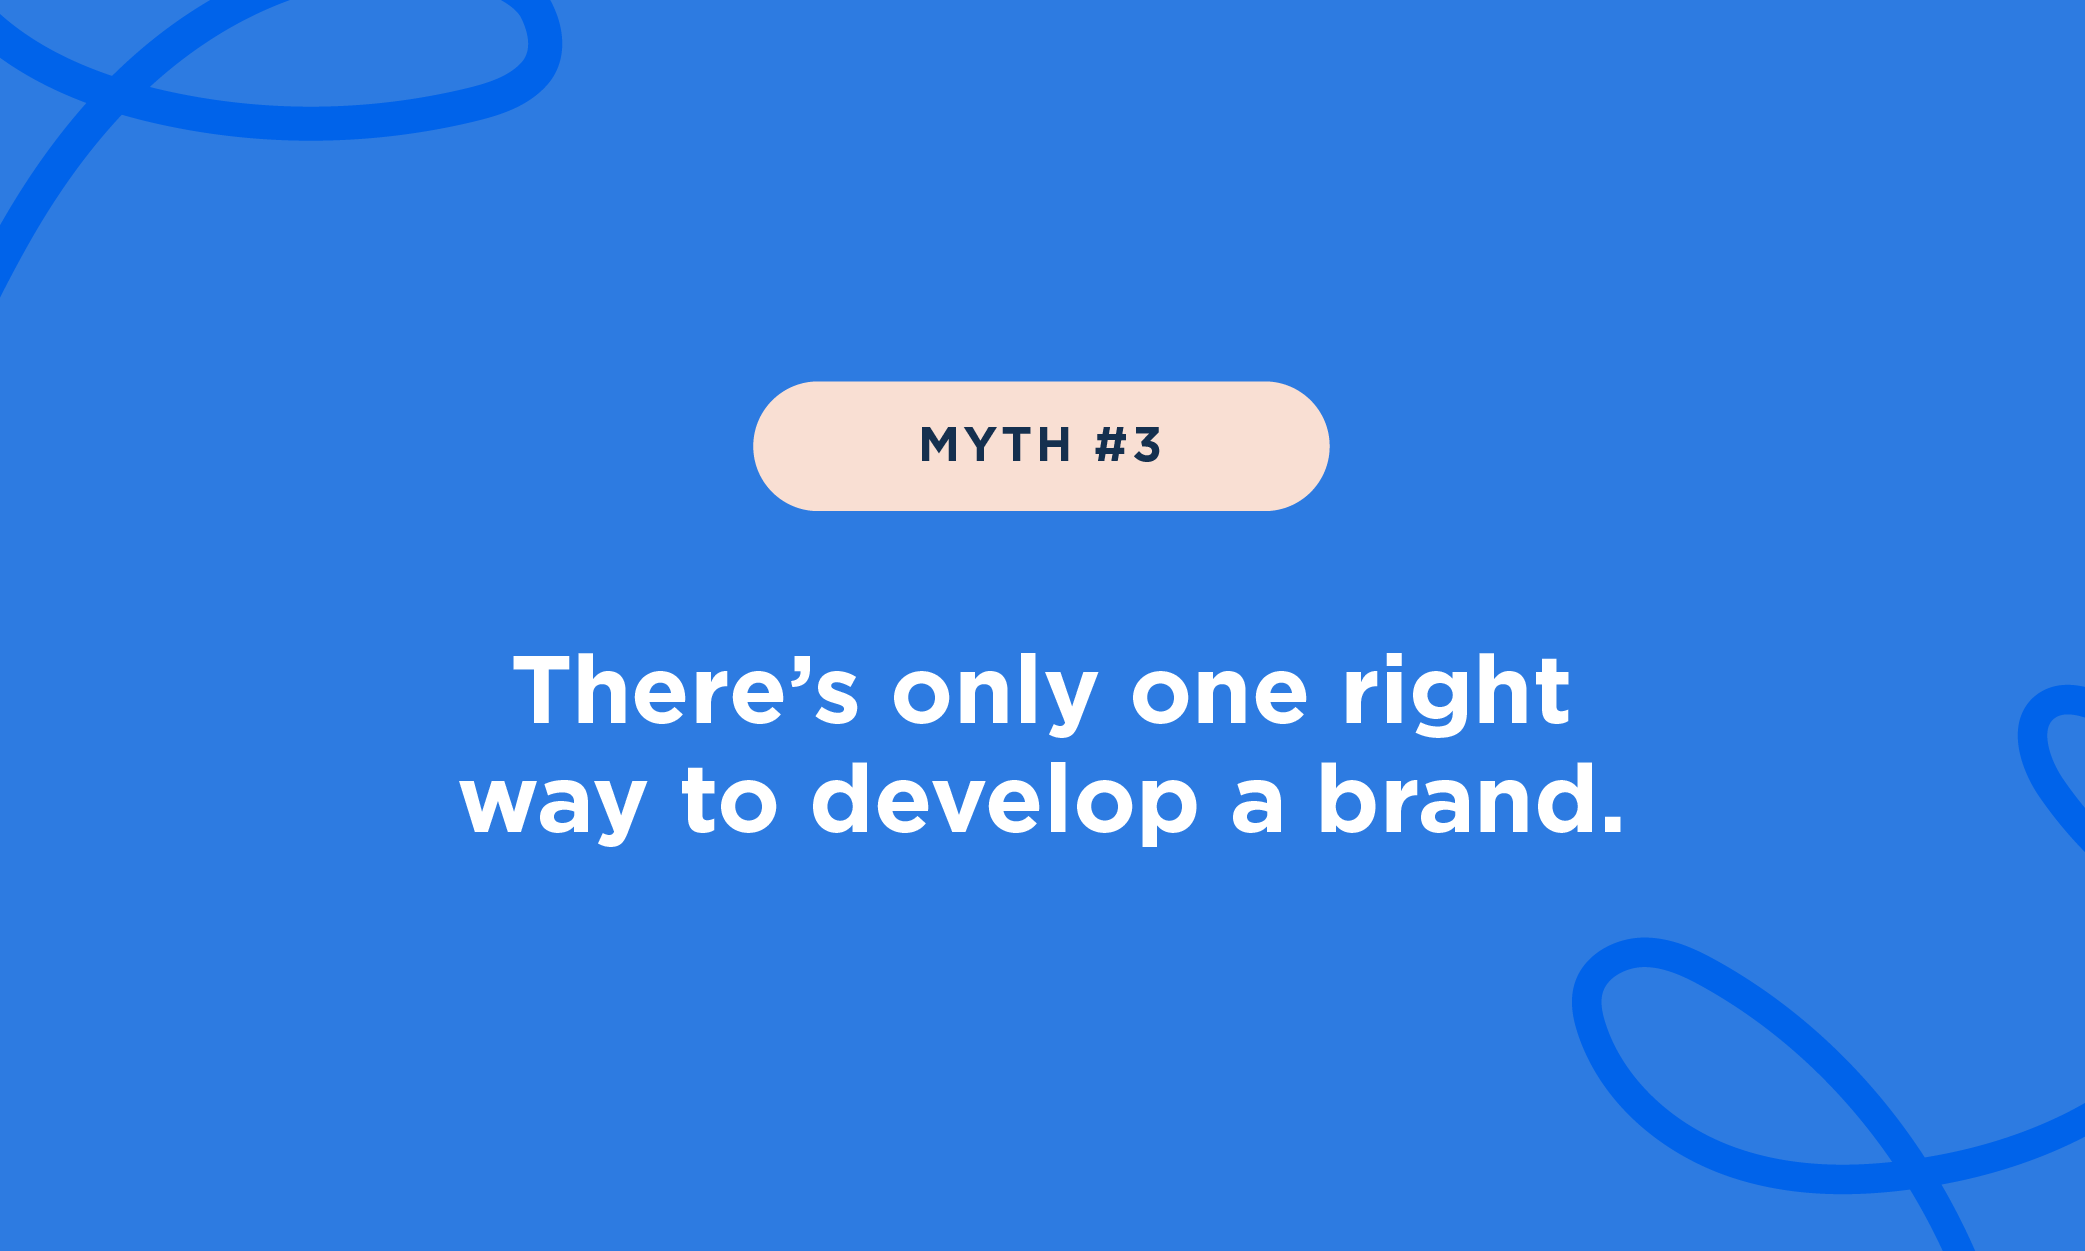 Myth #3: There’s only one right way to develop a brand.